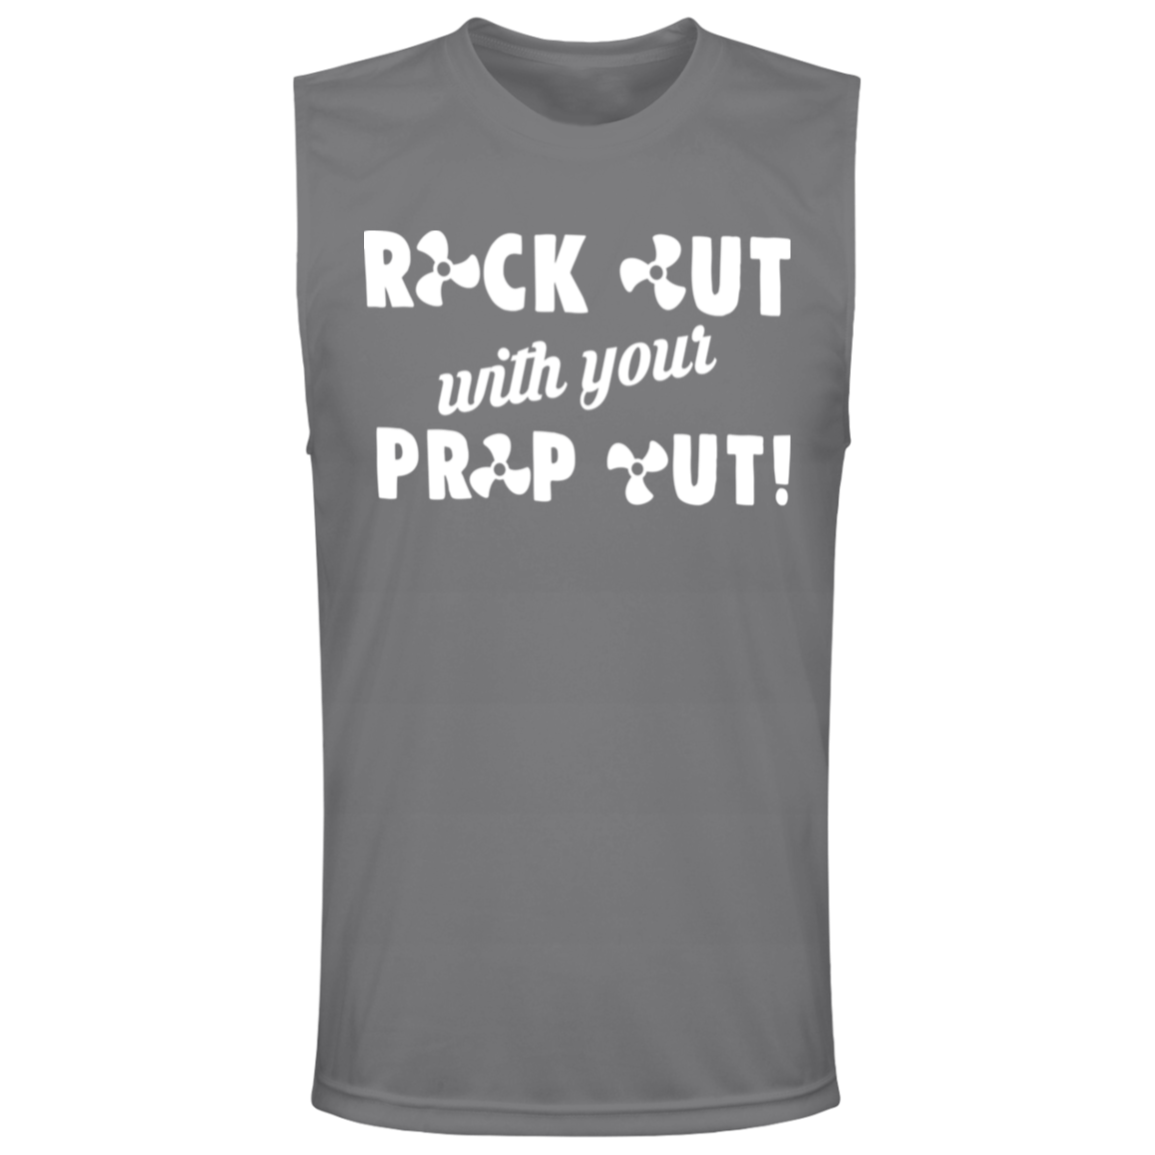 ***2 SIDED***  HRCL FL - Rock Out with your Prop Out - - 2 Sided - UV 40+ Protection TT11M Team 365 Mens Zone Muscle Tee